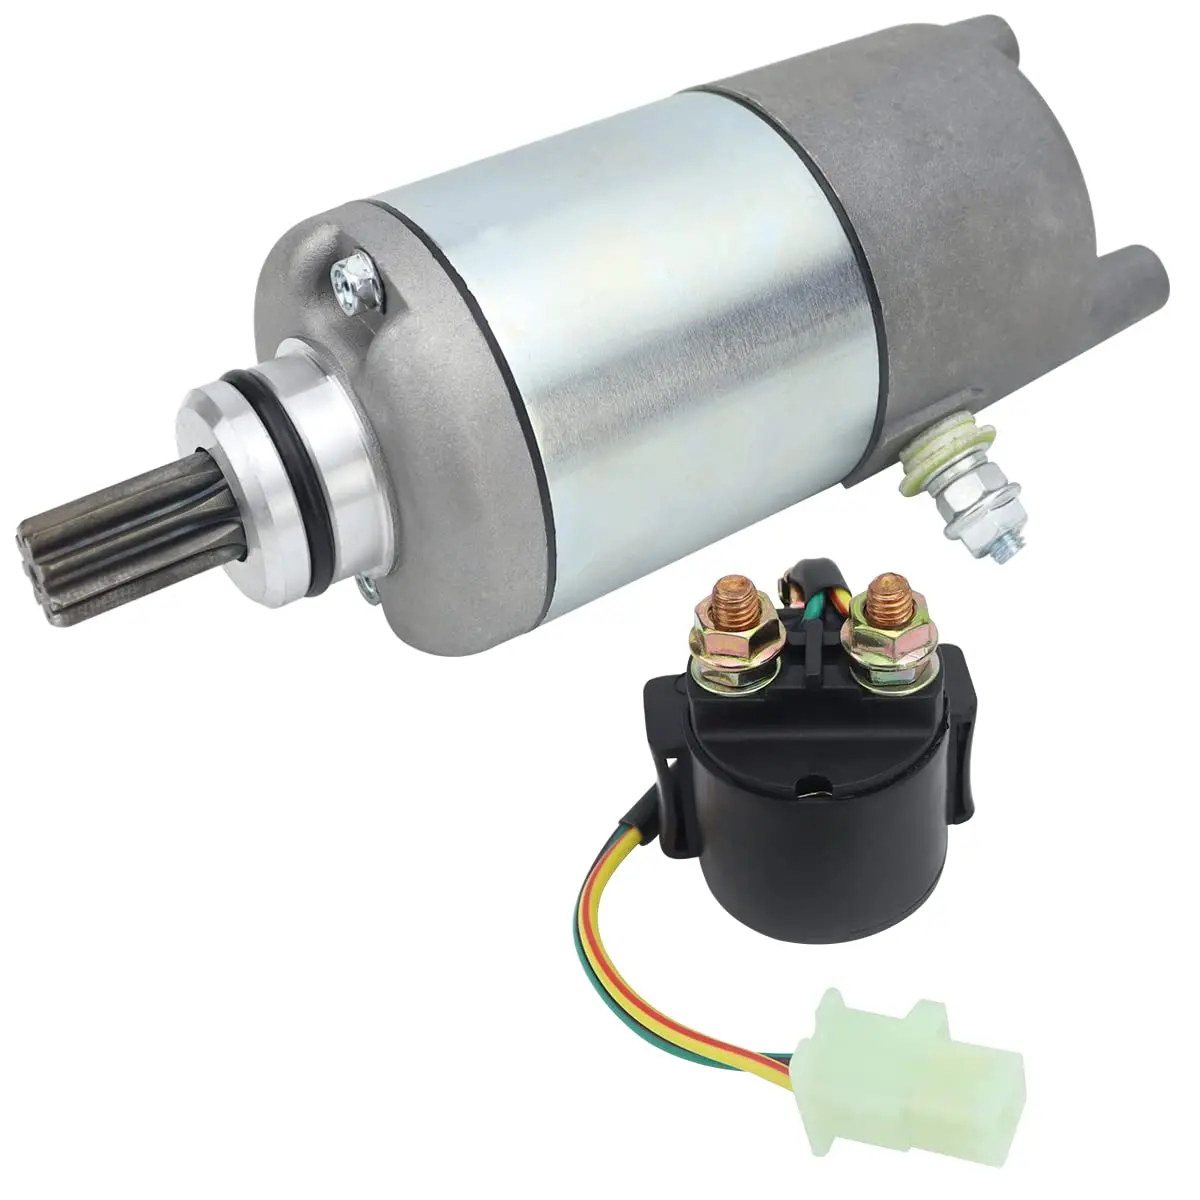 Starter & Solenoid Relay fit for Yamaha Moto-4 200 85-90| Timberwolf 250 92-00| Tri-Moto 200 225 83-86, Replace 4XE-81800-00-00